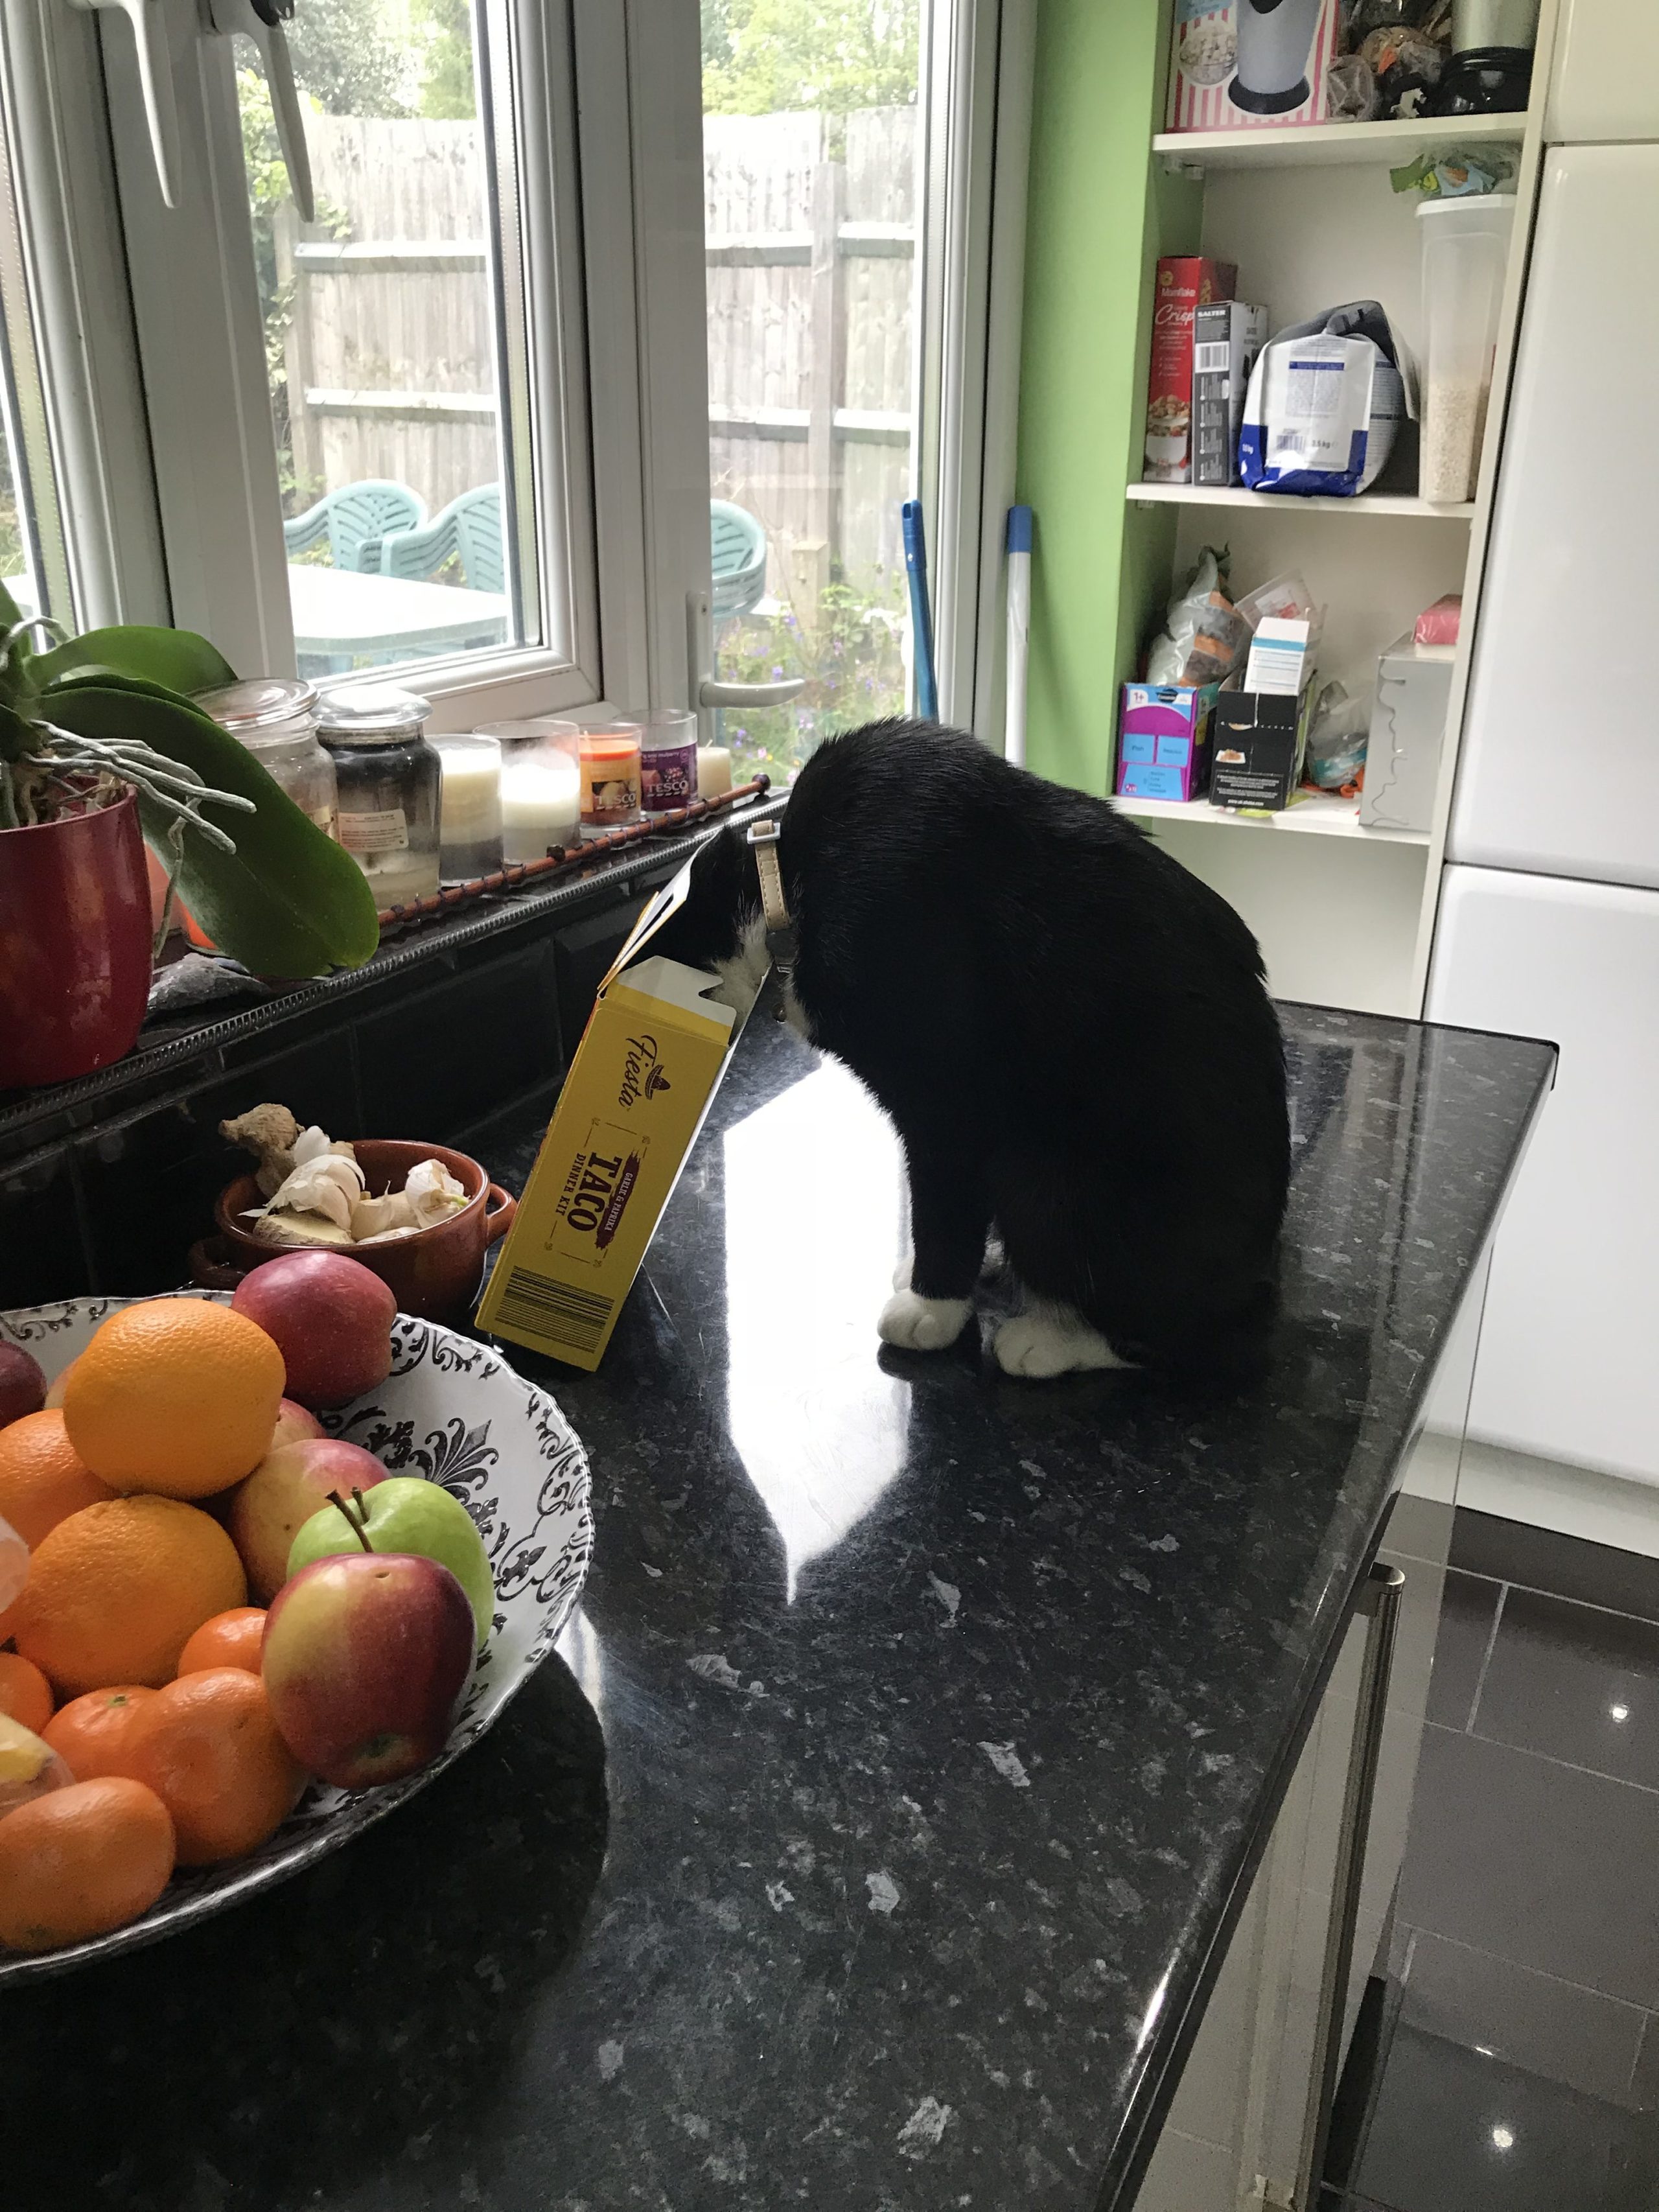 Black and white cat helping himself to food